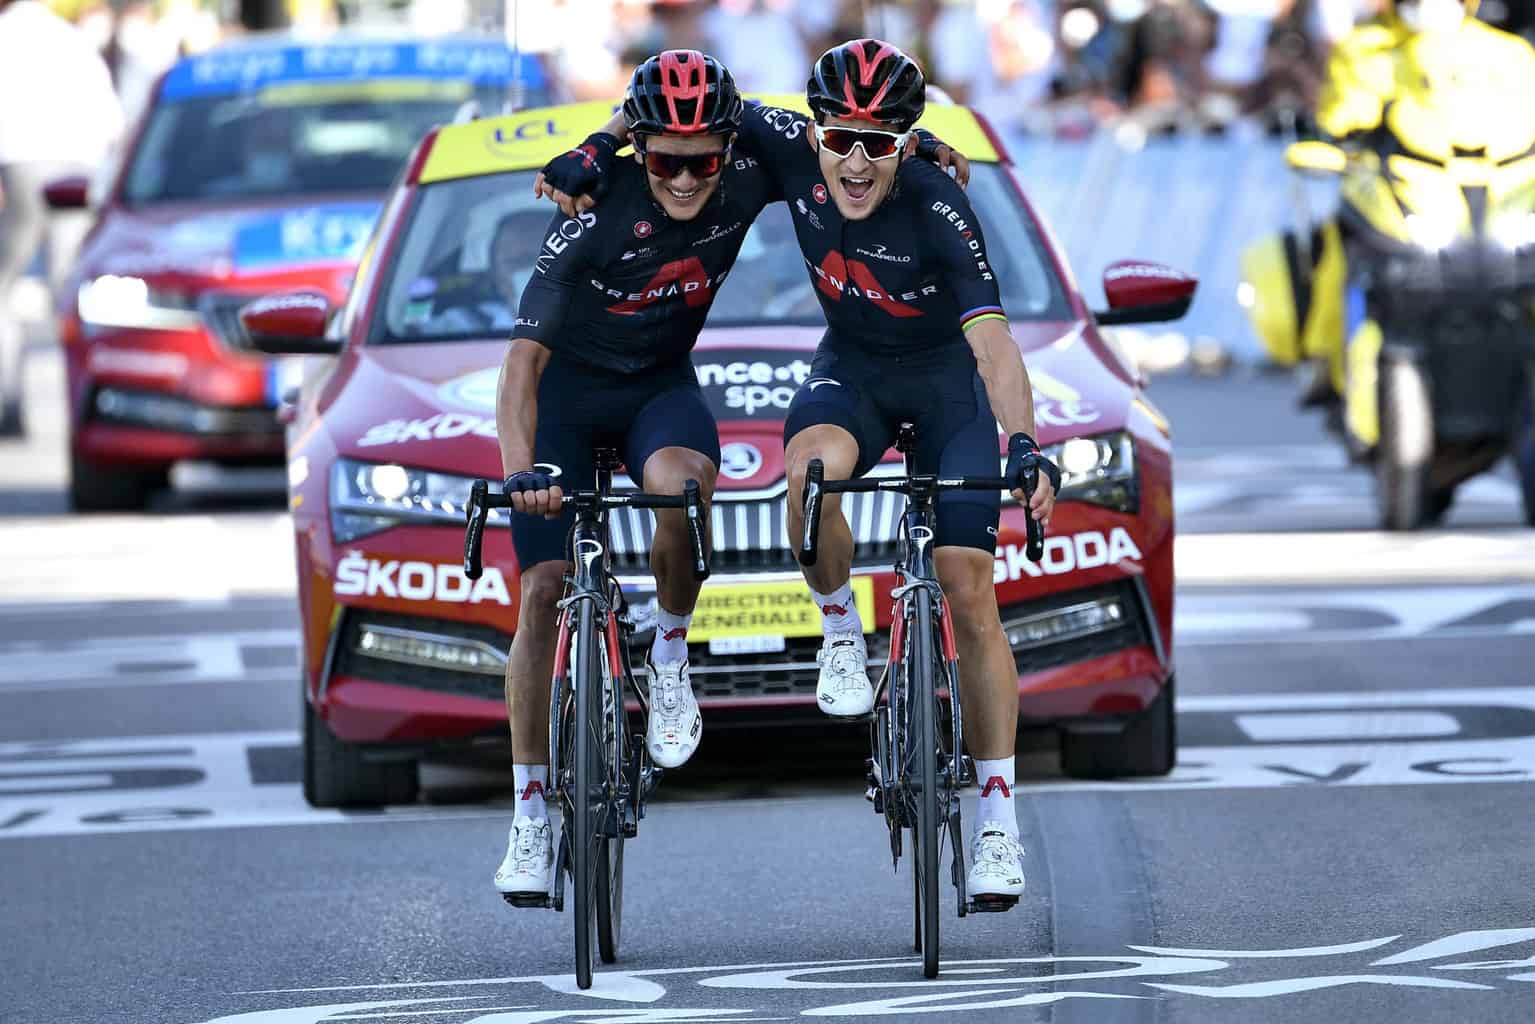 Ineos Grenadiers wins Stage 18 of 2020 Tour de France